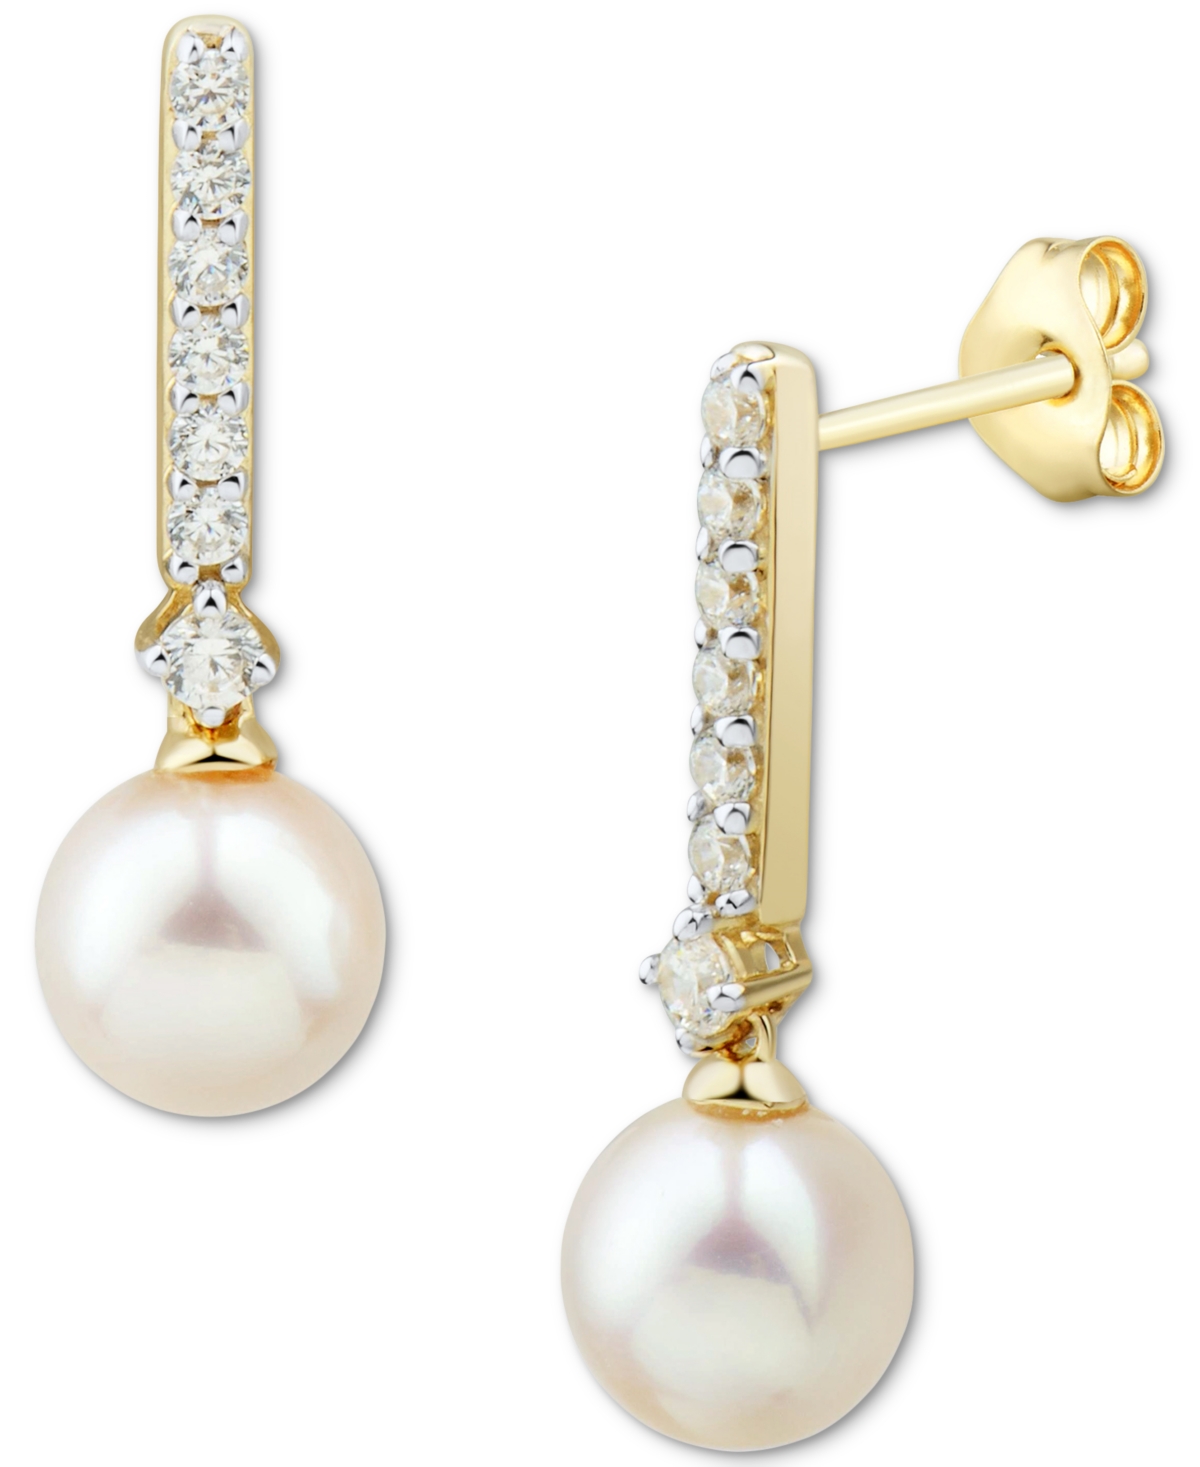 Cultured Freshwater Pearl (6mm) & Diamond (1/5 ct. t.w.) Drop Earrings in 14k Yellow Gold (Also in White Gold) - Yellow Gold